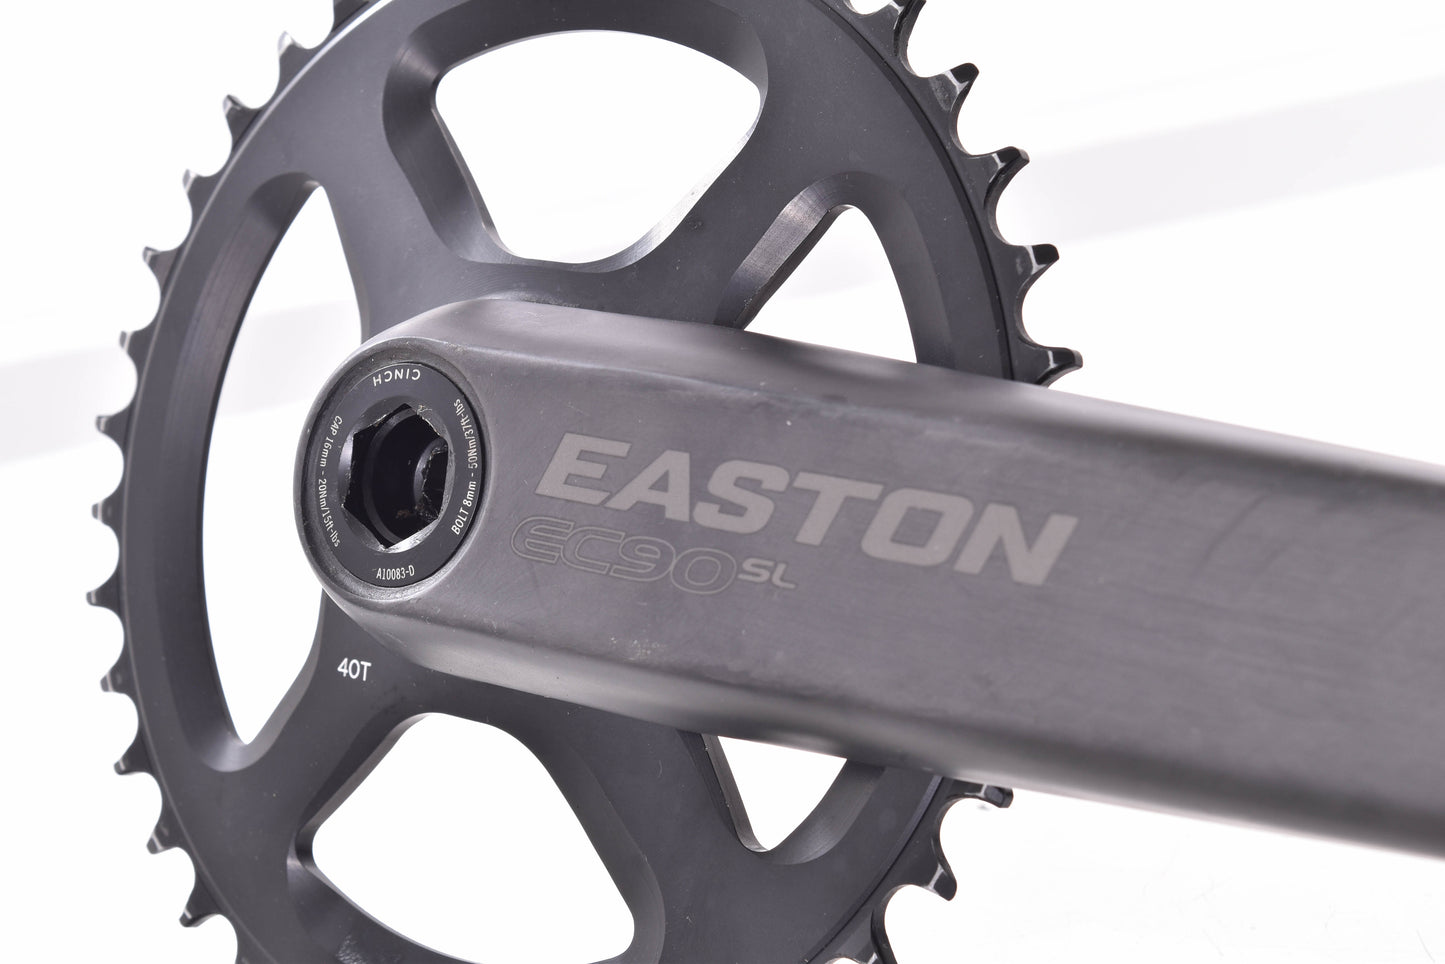 USED Easton EC90 SL 40T 175mm Carbon Crankset 1x 40t CINCH Wolf Tooth 38t Oval Chainring